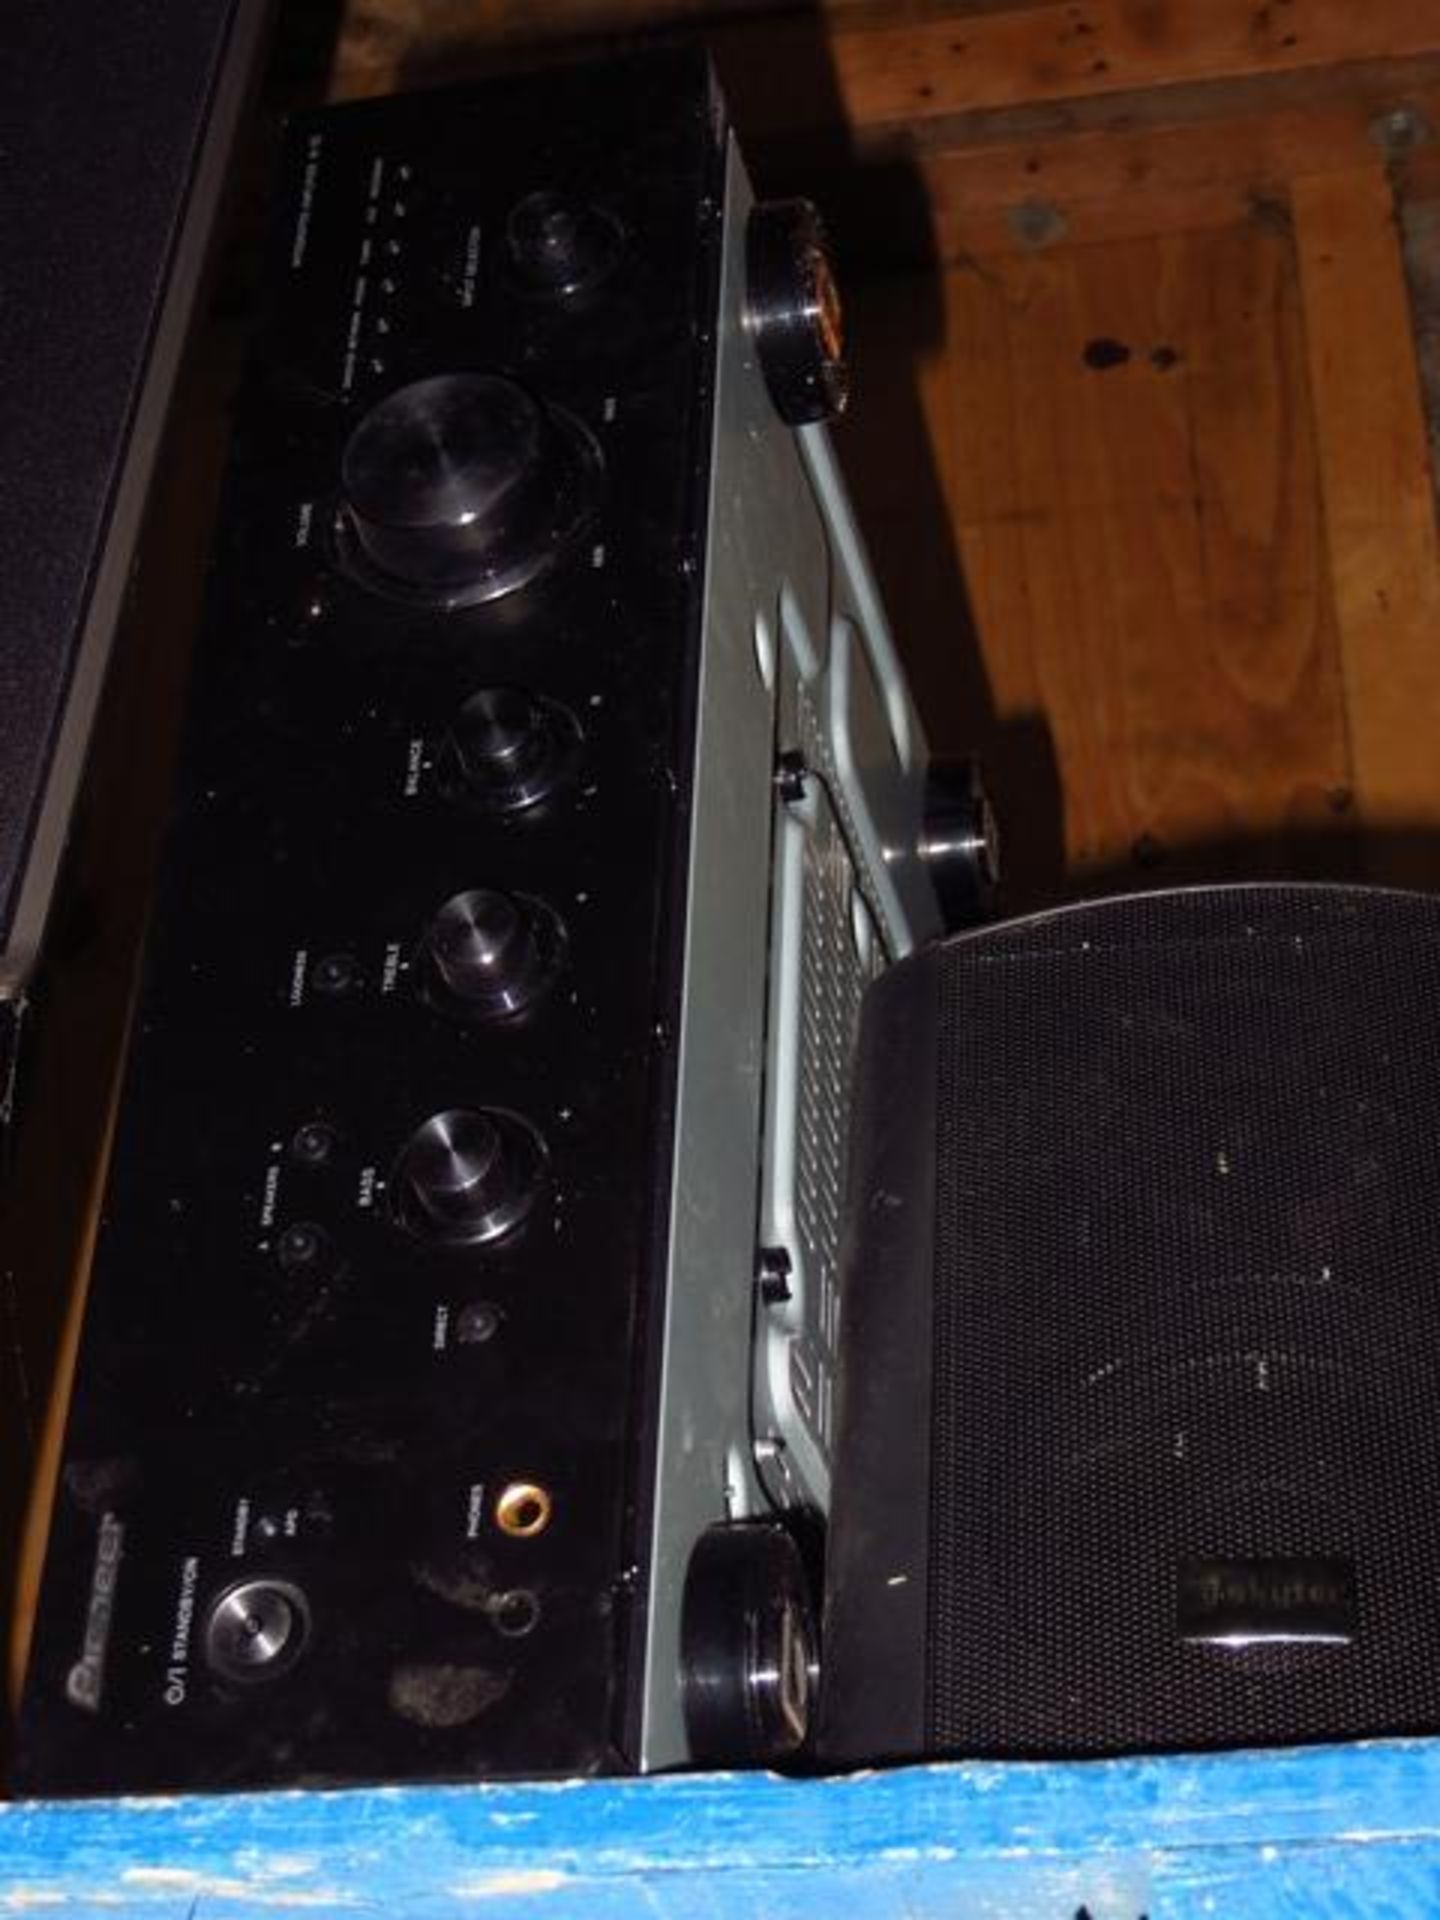 Pioneer A10 Intergrated Amplifier c/w 9 Skytech Speakers & one Canon Sub WooferPlease note: This